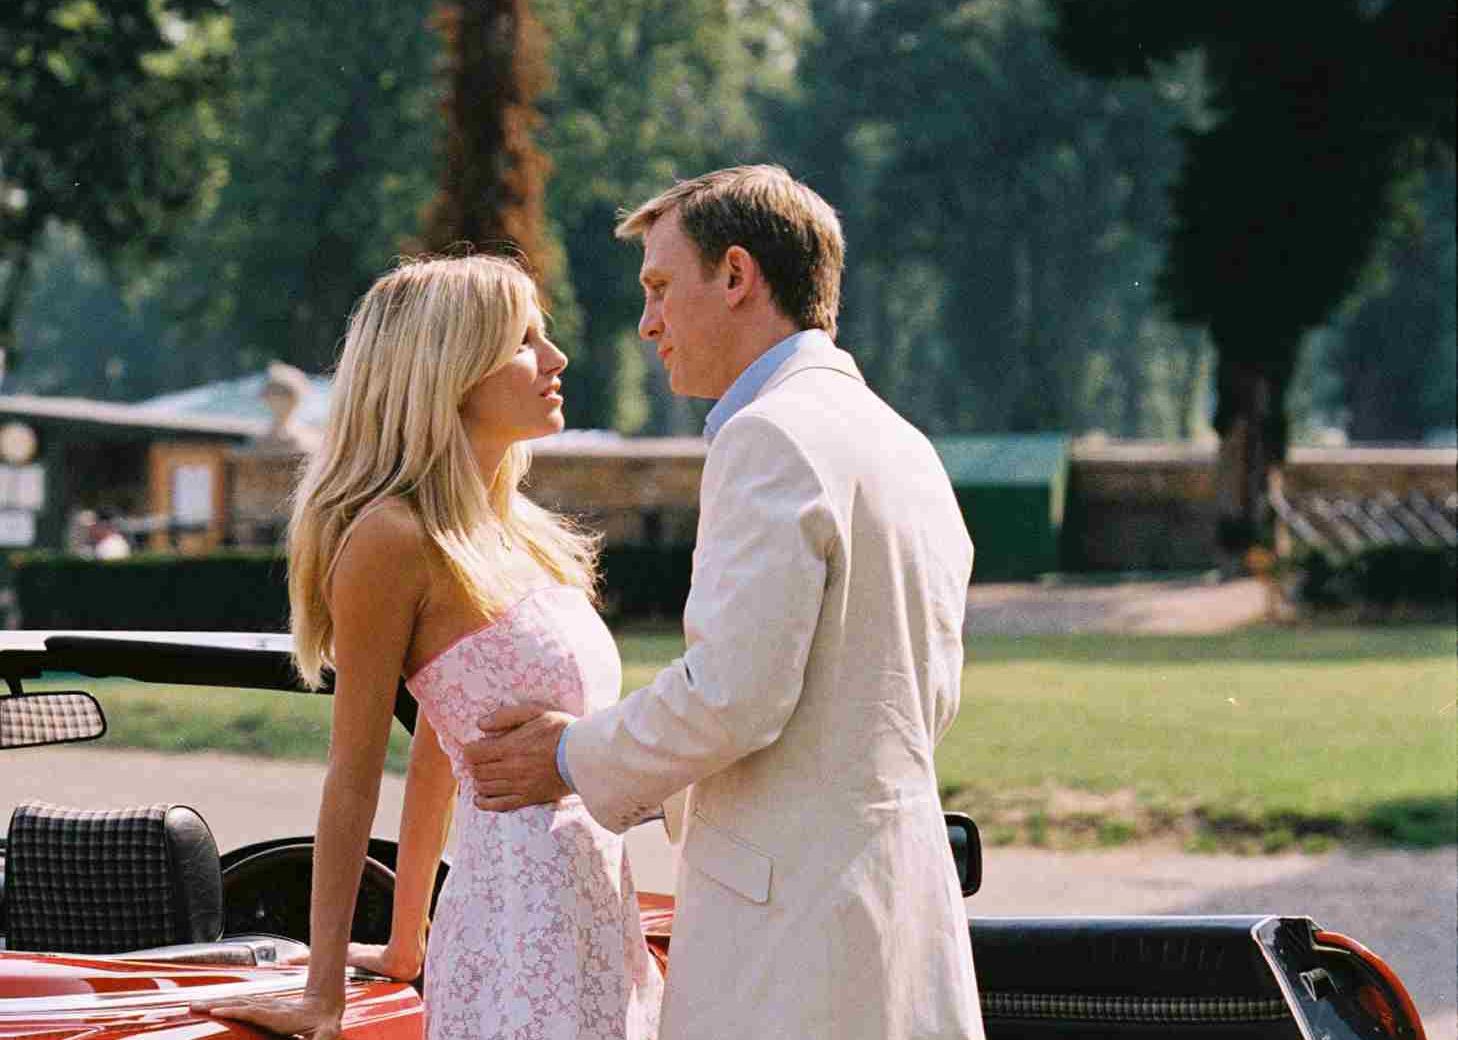 Daniel Craig in a white suit leaning over to kiss Sienna Miller next to a red classic convertible car.